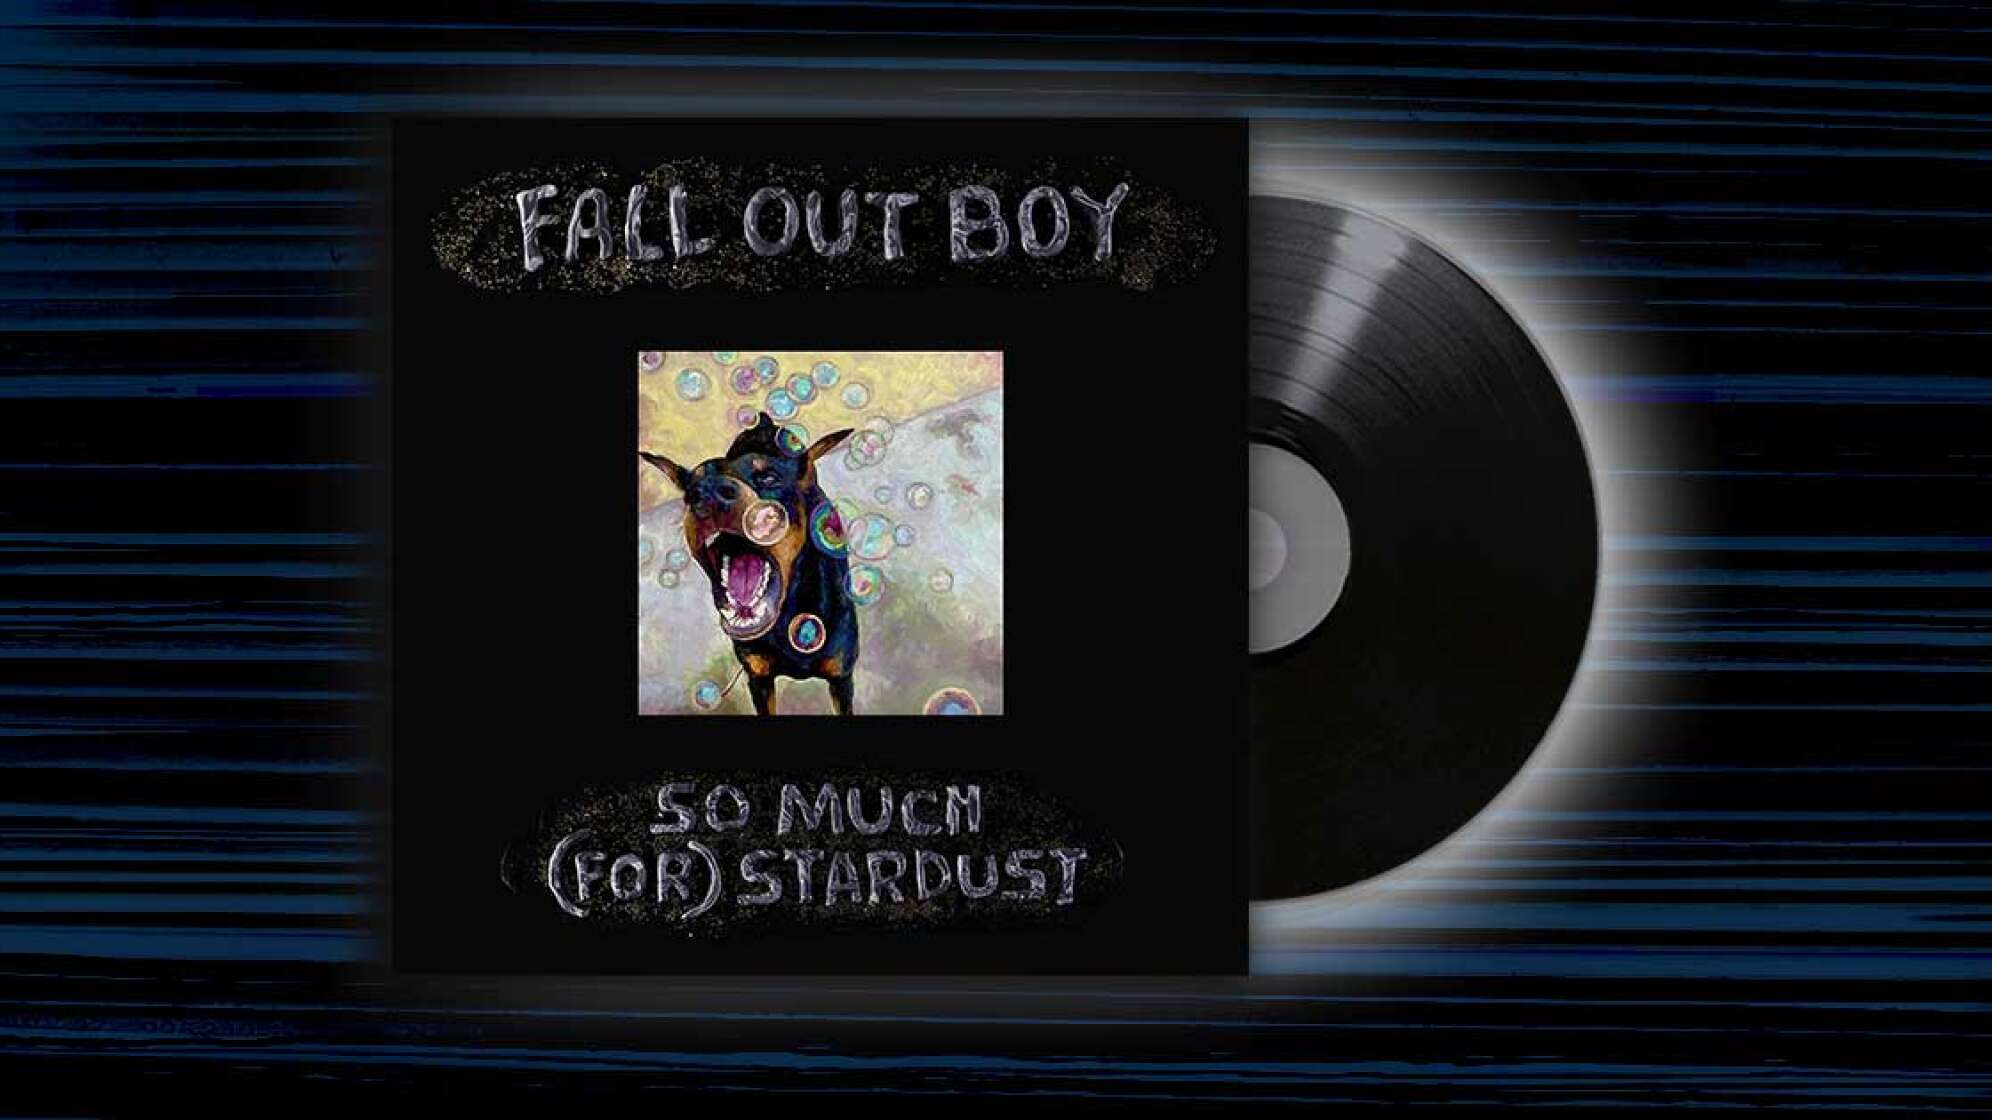 Albumcover vom Album: Fall Out Boy - "So Much (For) Stardust"